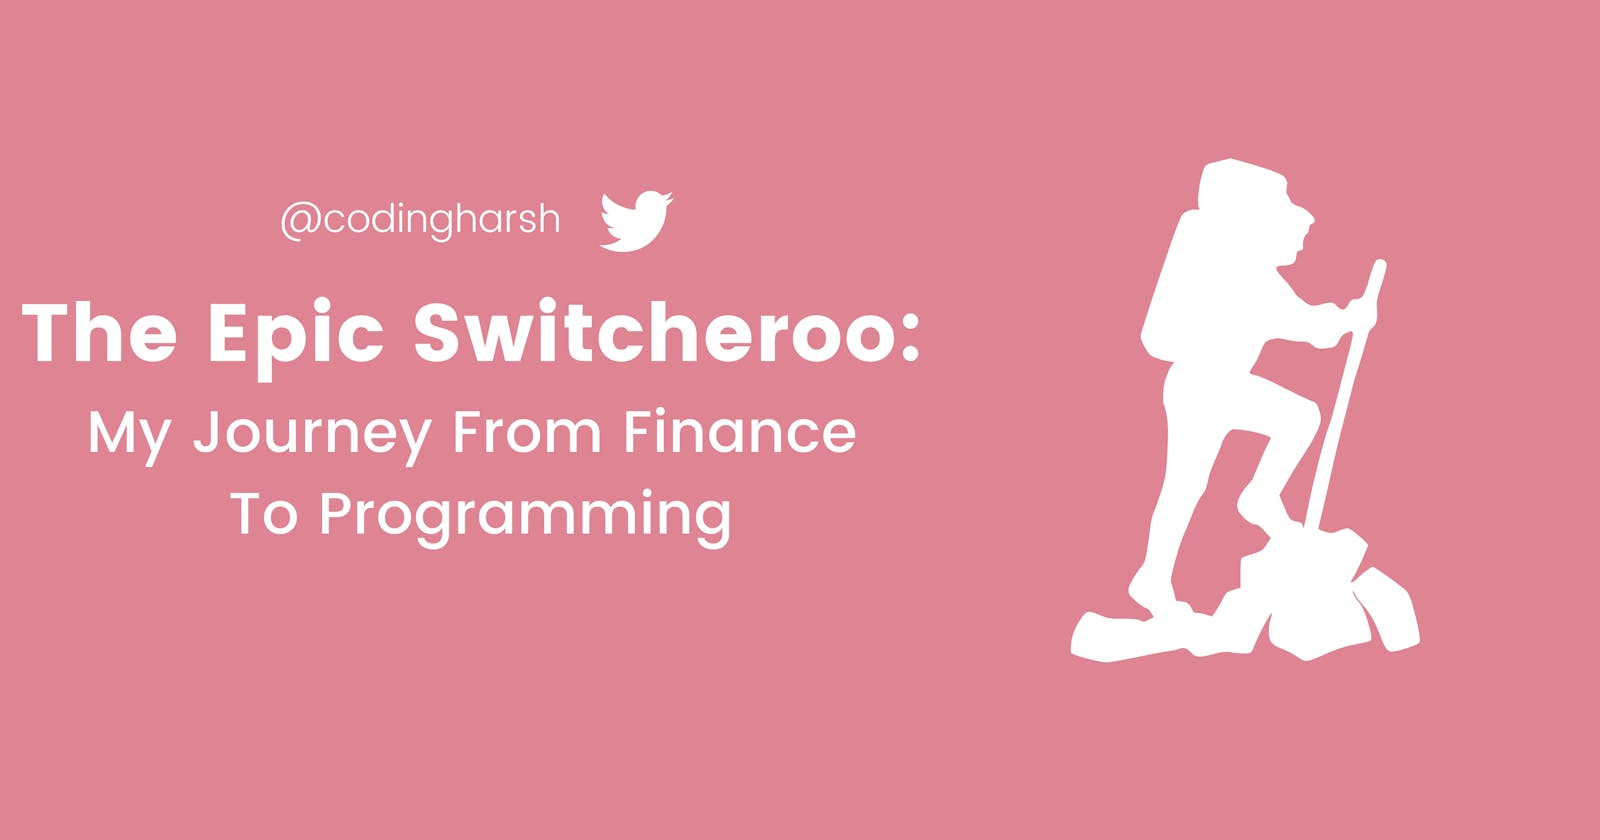 The Epic Switcheroo: My Journey From Finance To Programming